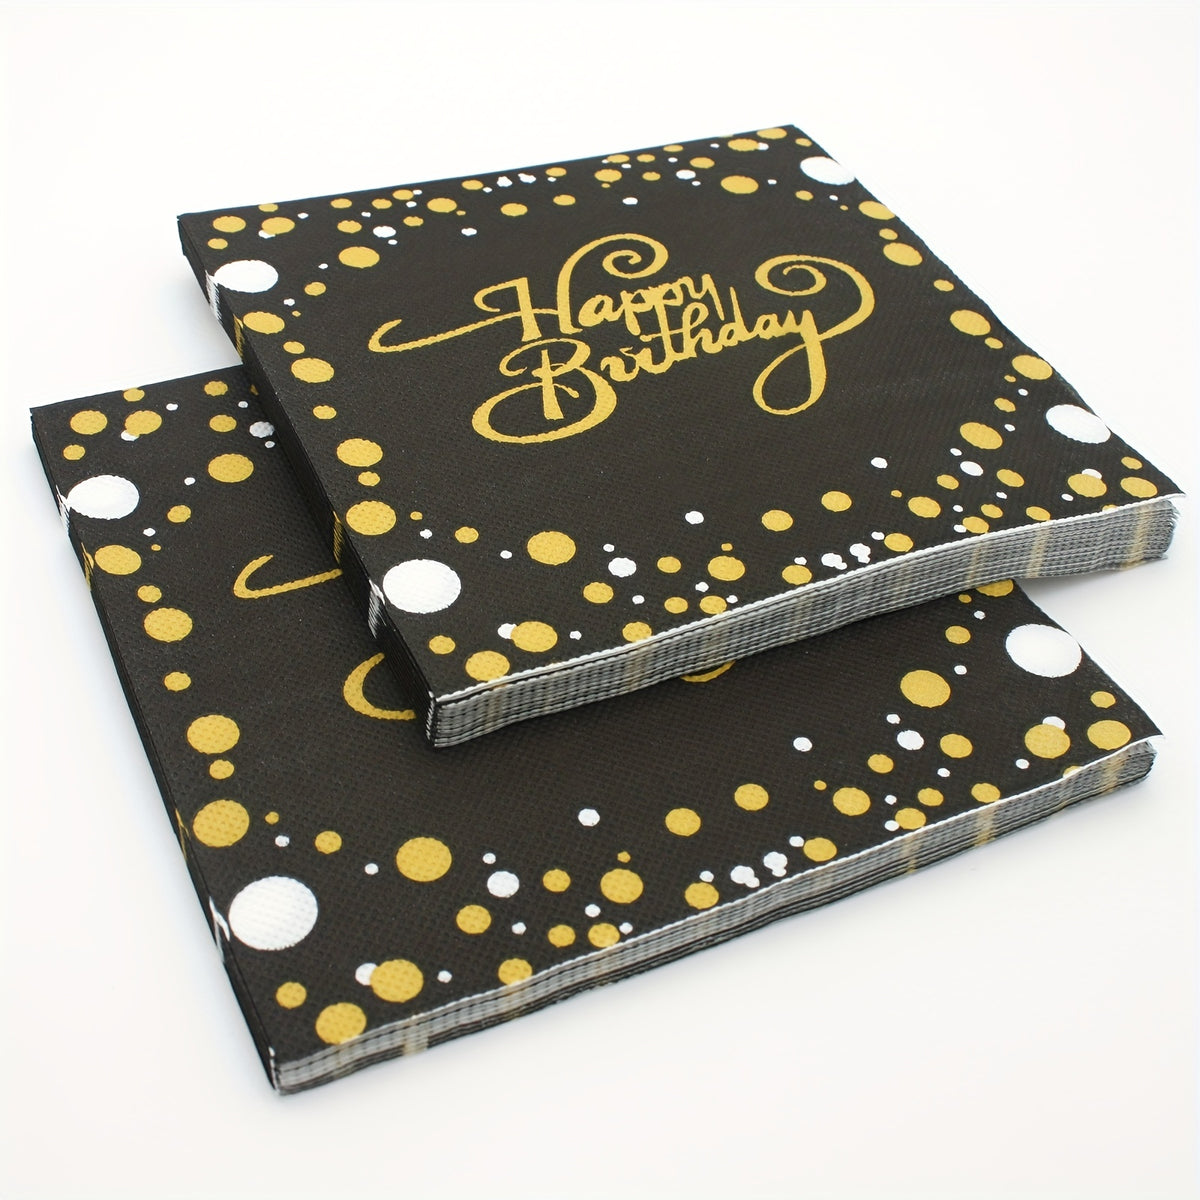 a black and yellow birthday cake with polka dots